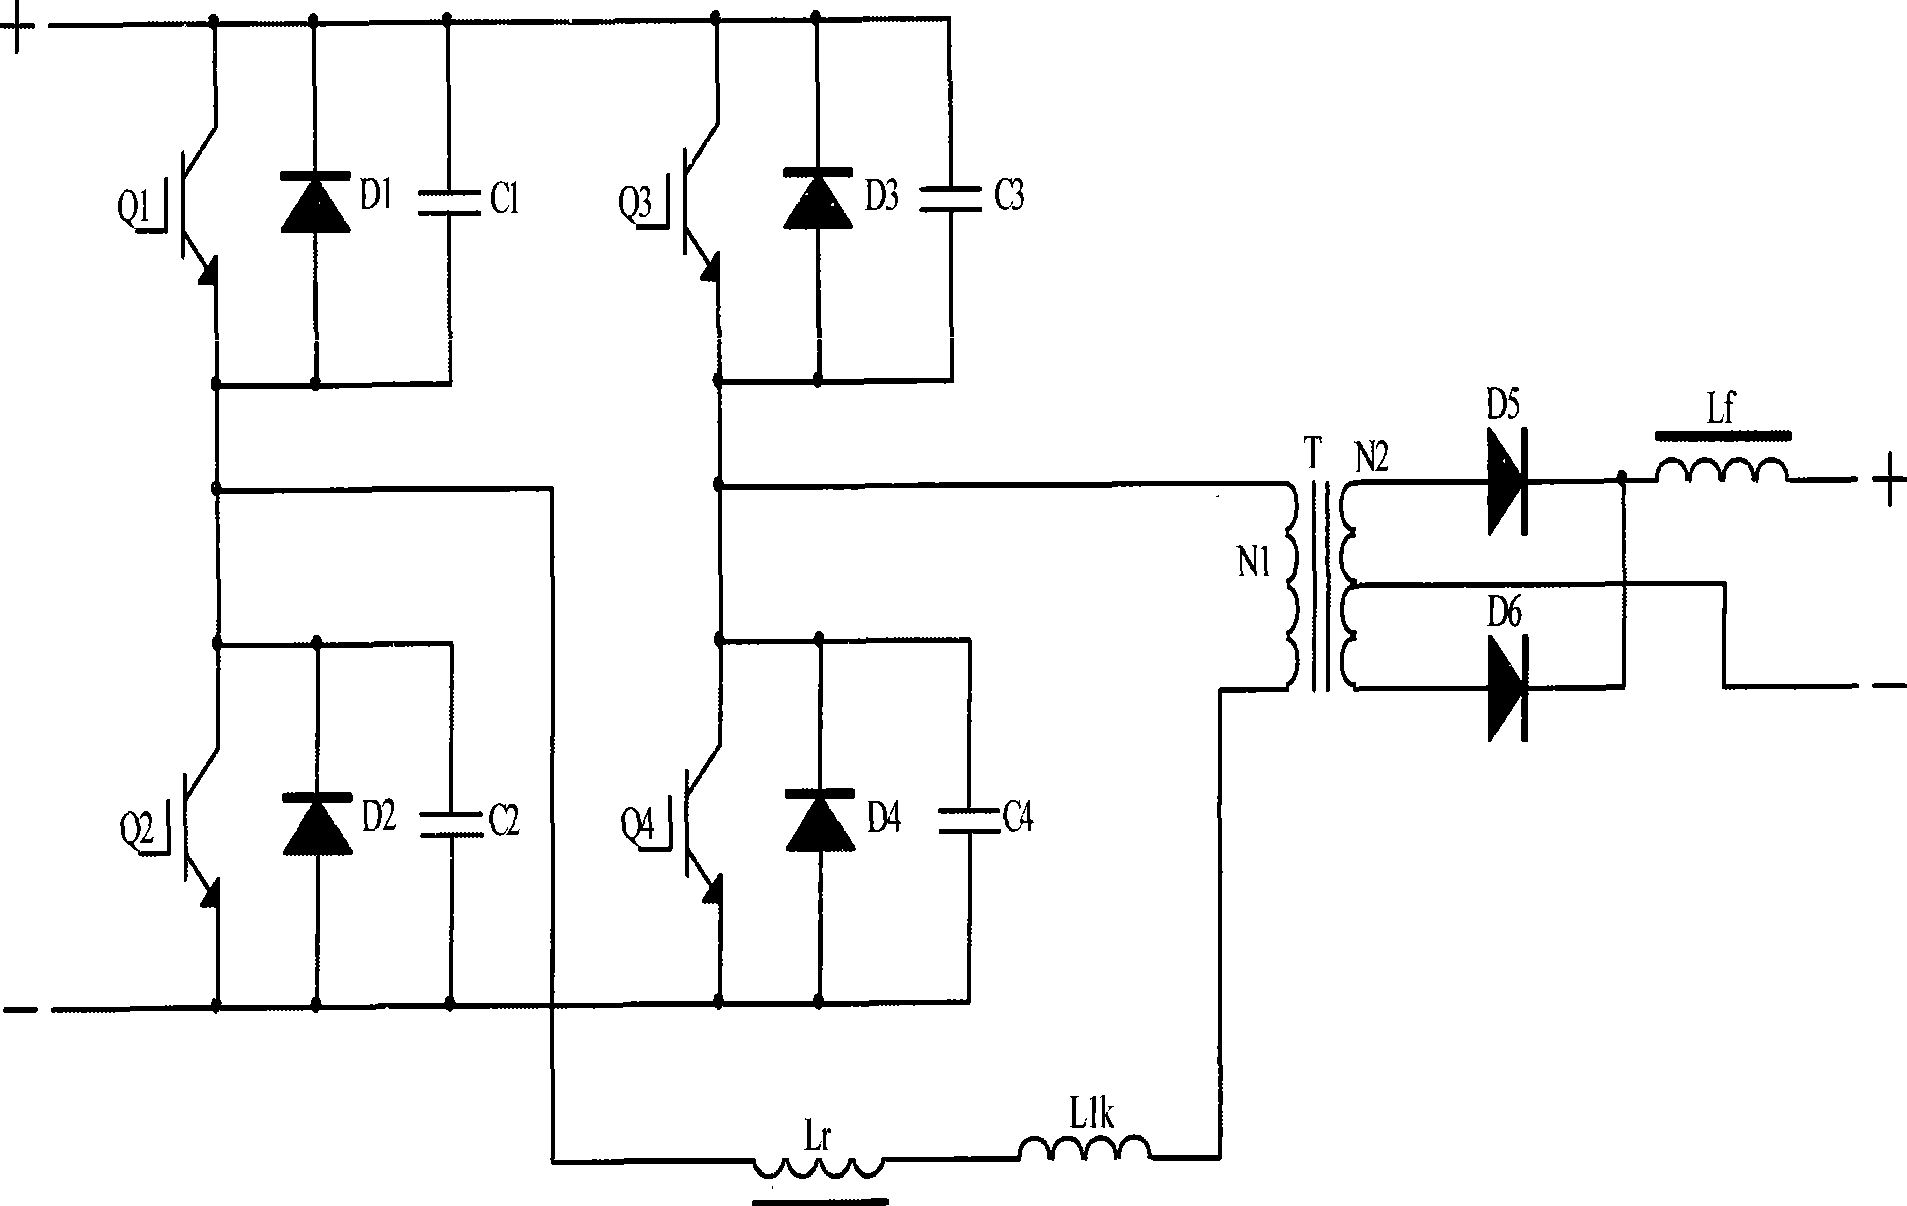 Zero-voltage soft switch topological main circuit of arc welding inverter